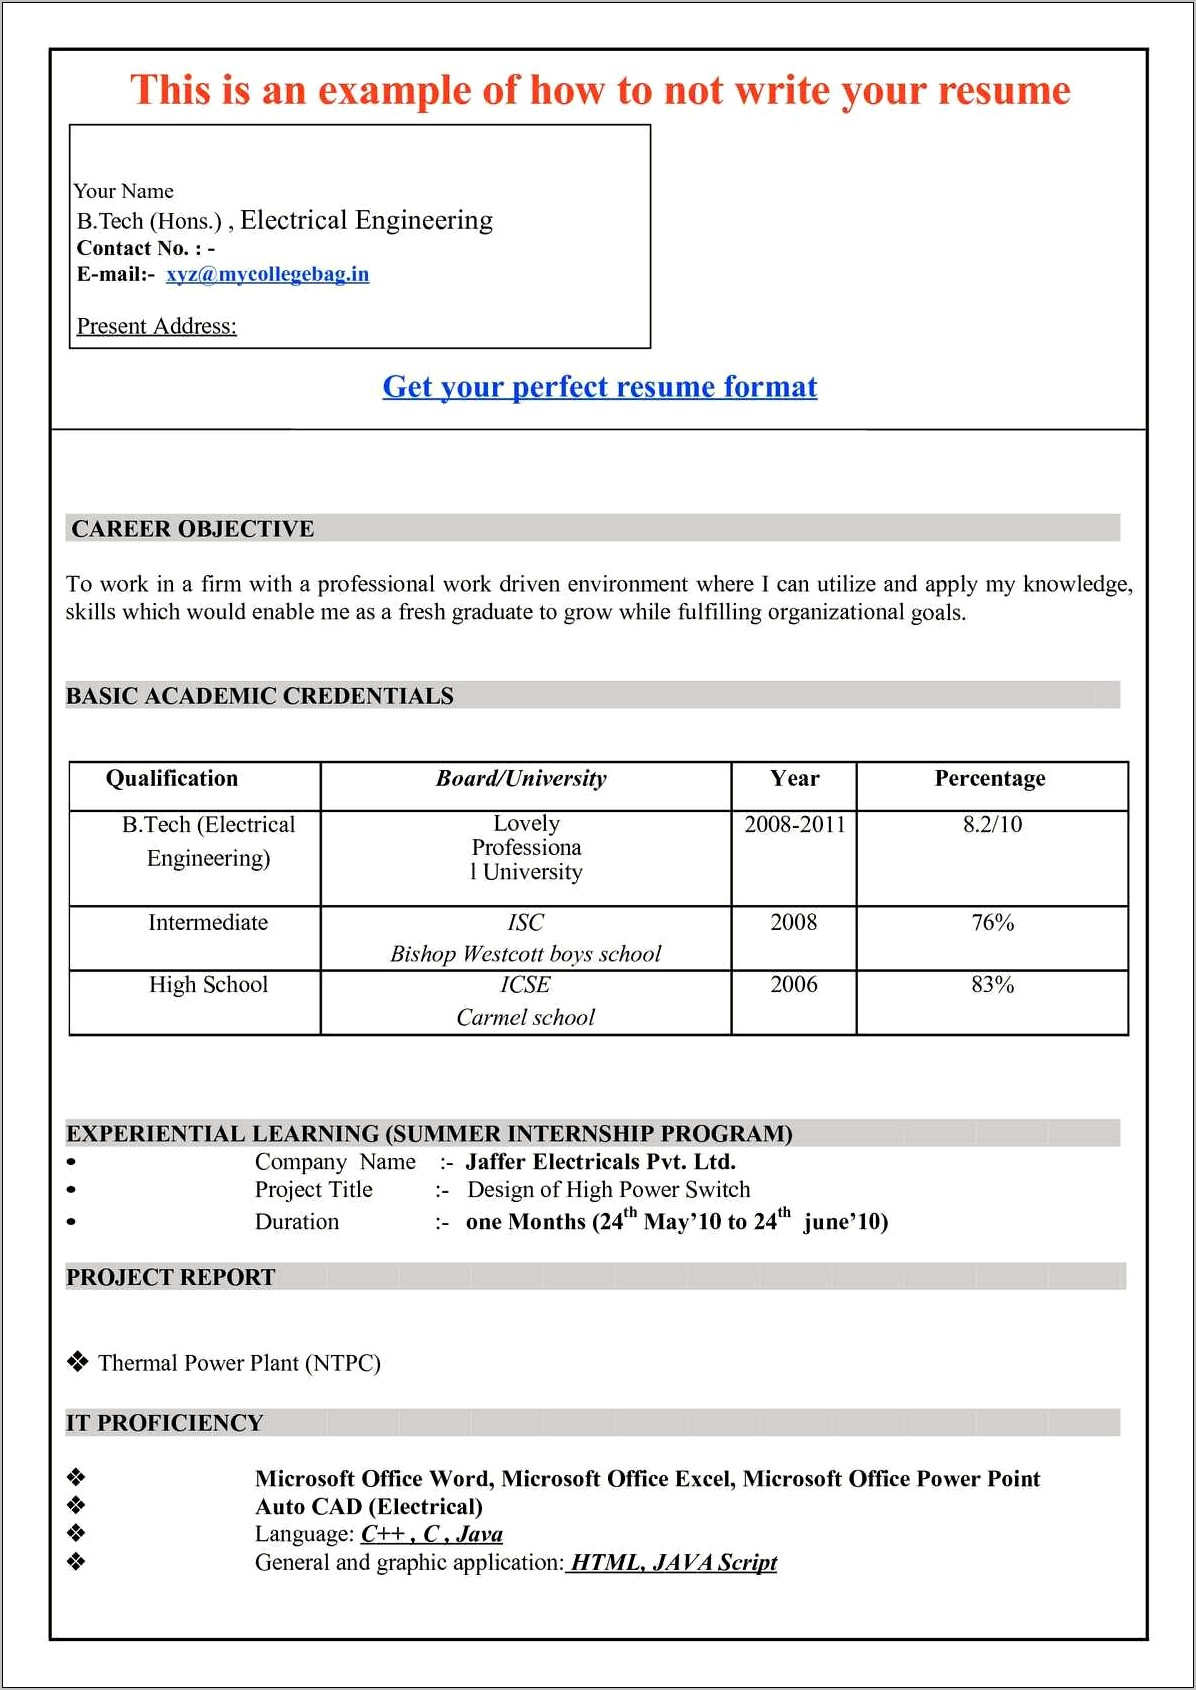 Download Resume Format In Ms Word 2007